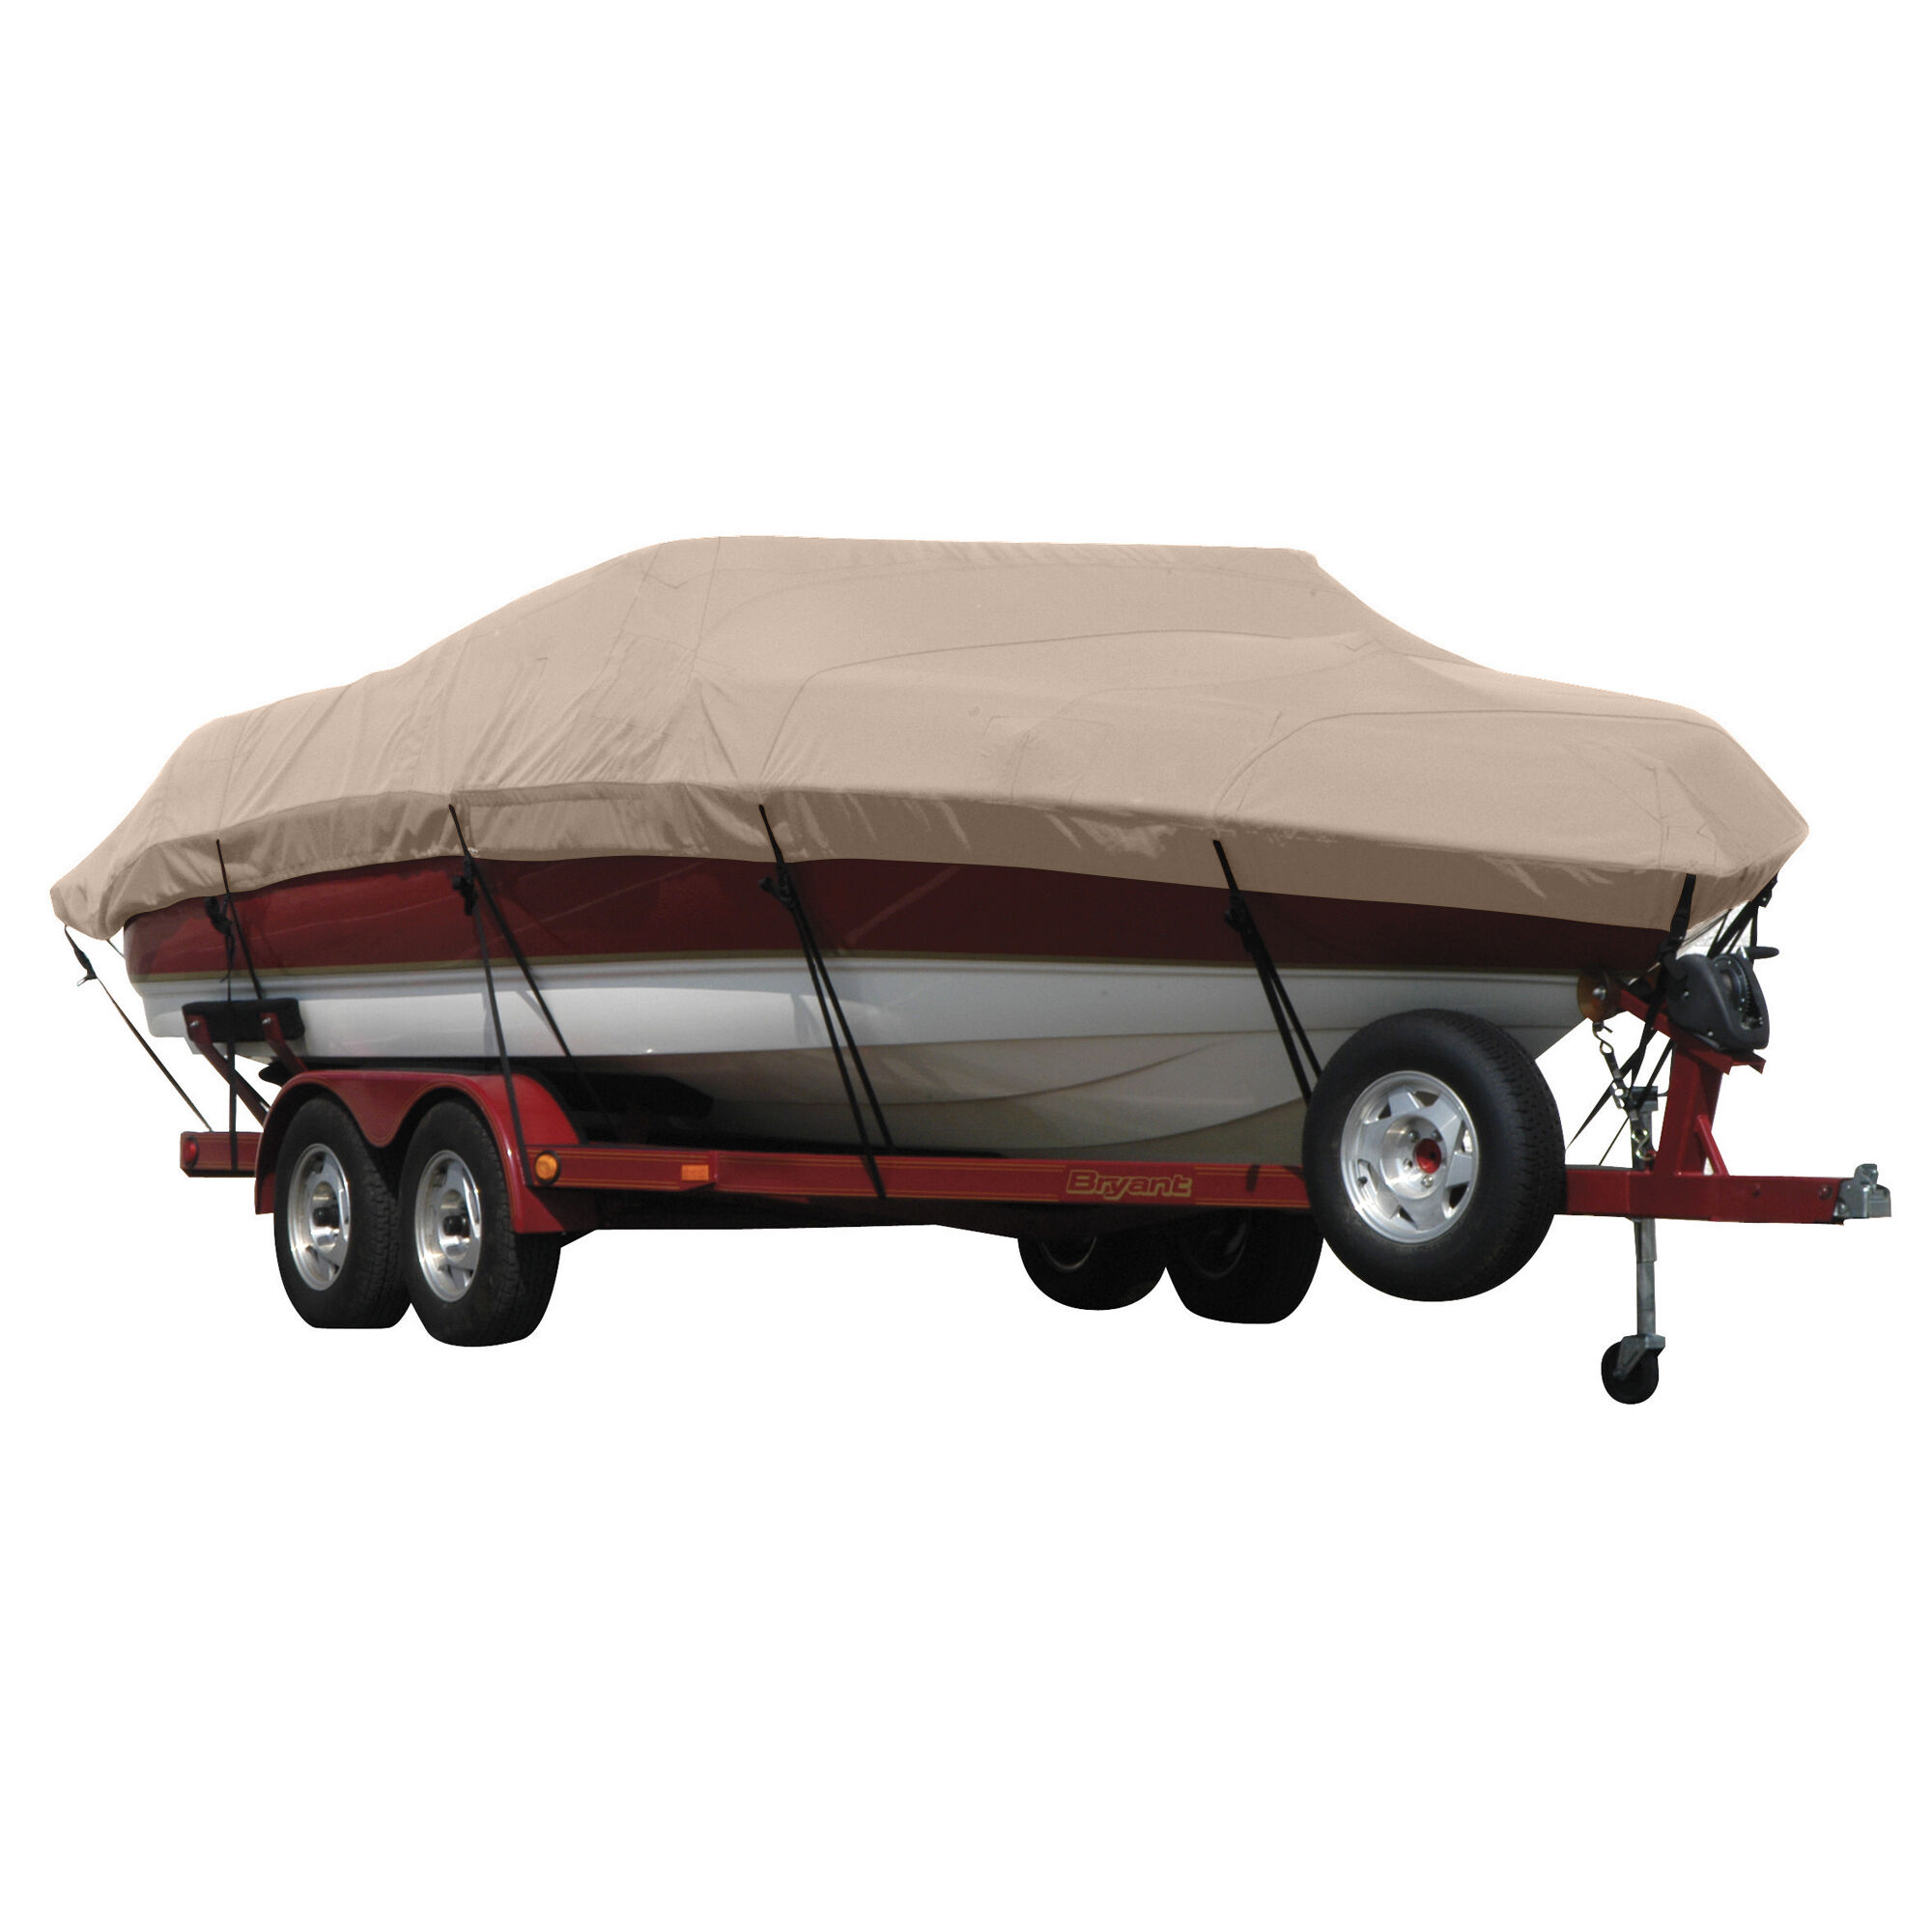 Covermate Exact Fit Sunbrella Boat Cover for Campion Chase 800 Chase 800 I/O. Linnen in Linen Acrylic